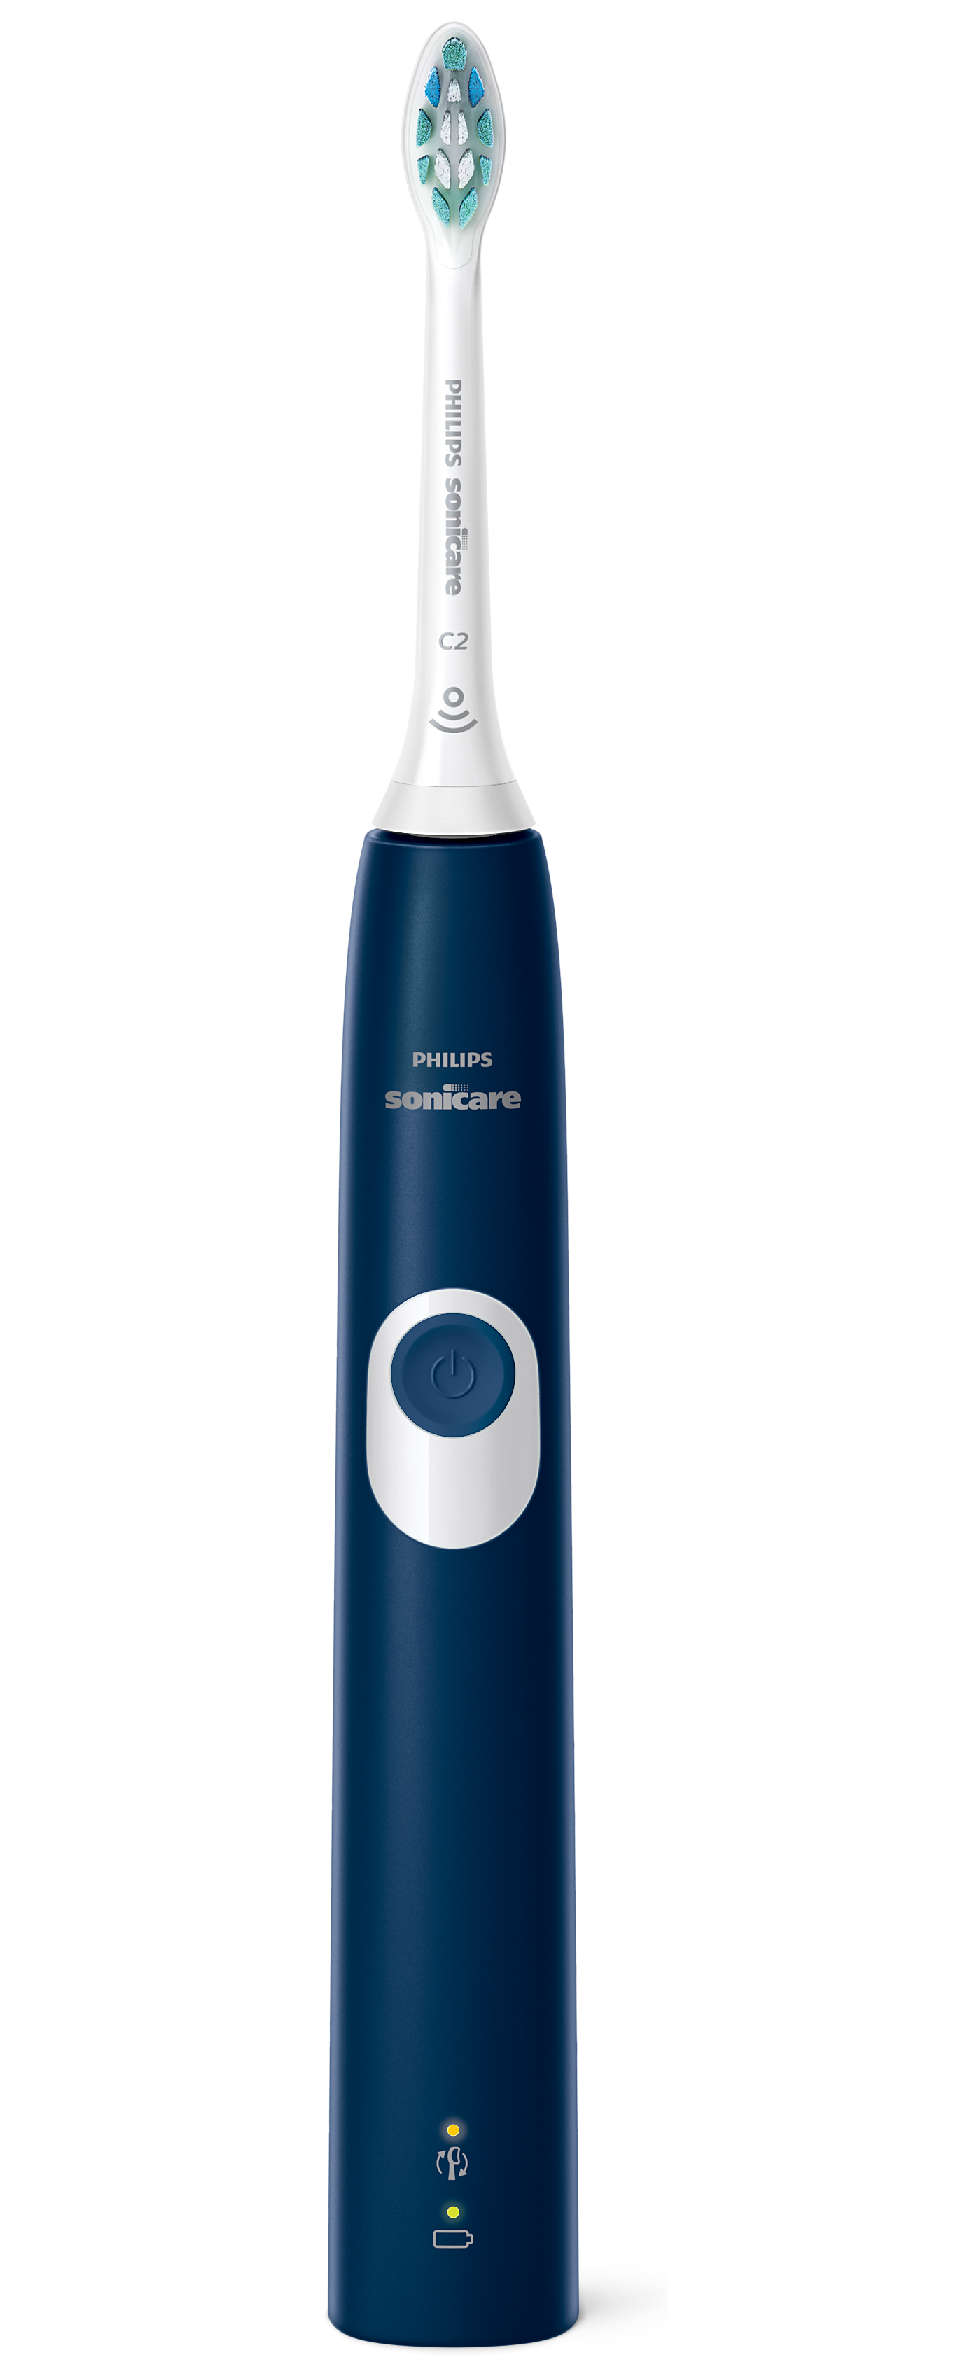 ProtectiveClean 4100 Sonic electric toothbrush HX6811/01 | Sonicare